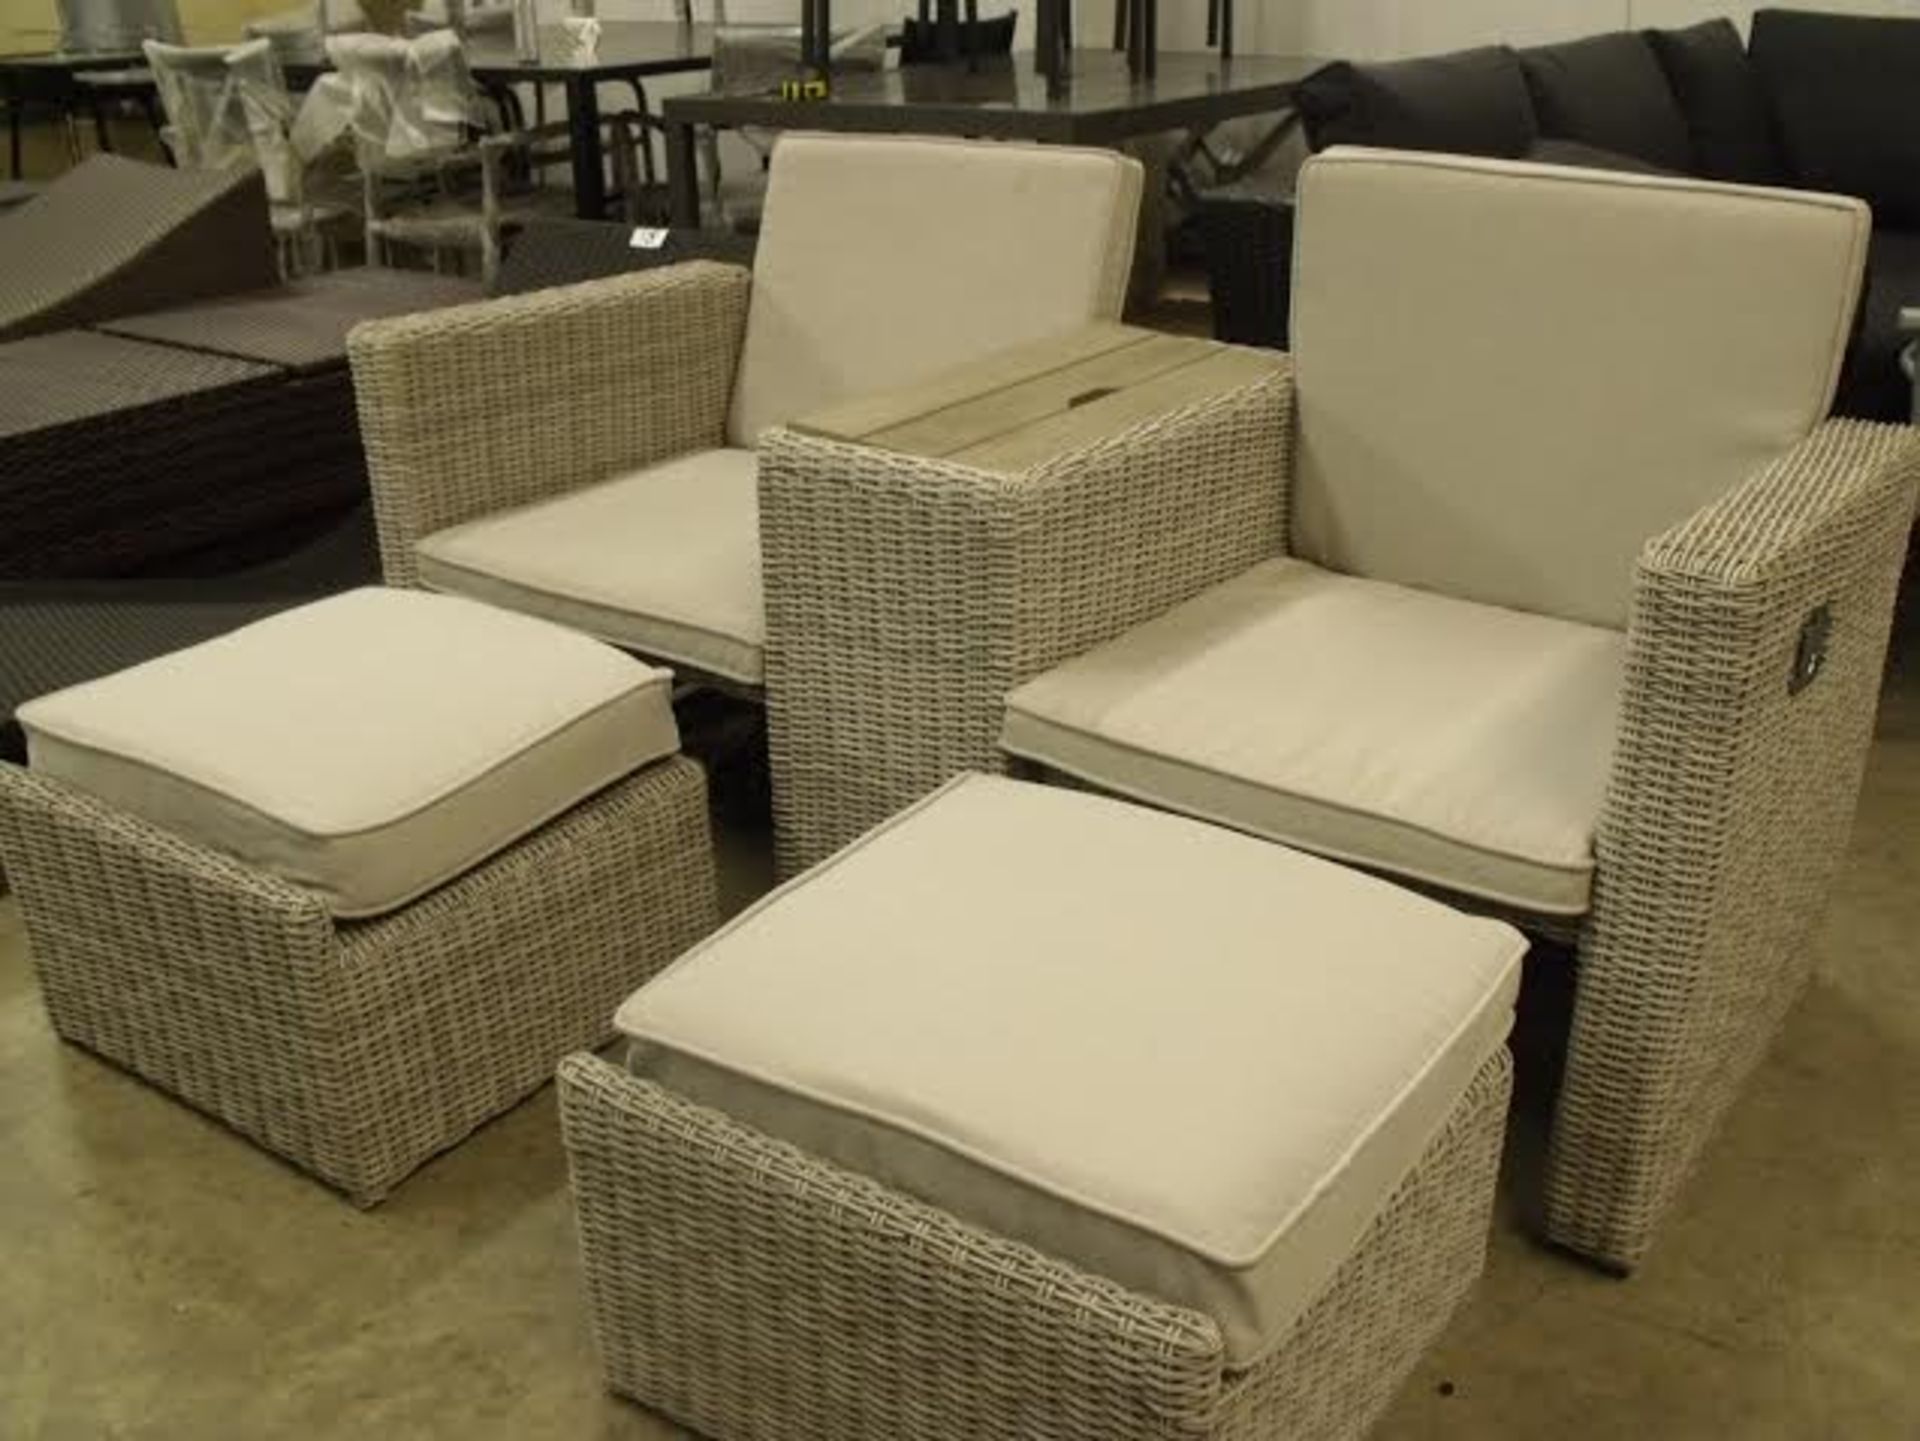 EXECUTIVE HIS n HERS RECLINING LOUNGE SET FULL ROUND MULTI GREY RATTAN 2 X STOW AWAY FOOTSTOOLS - Image 3 of 6